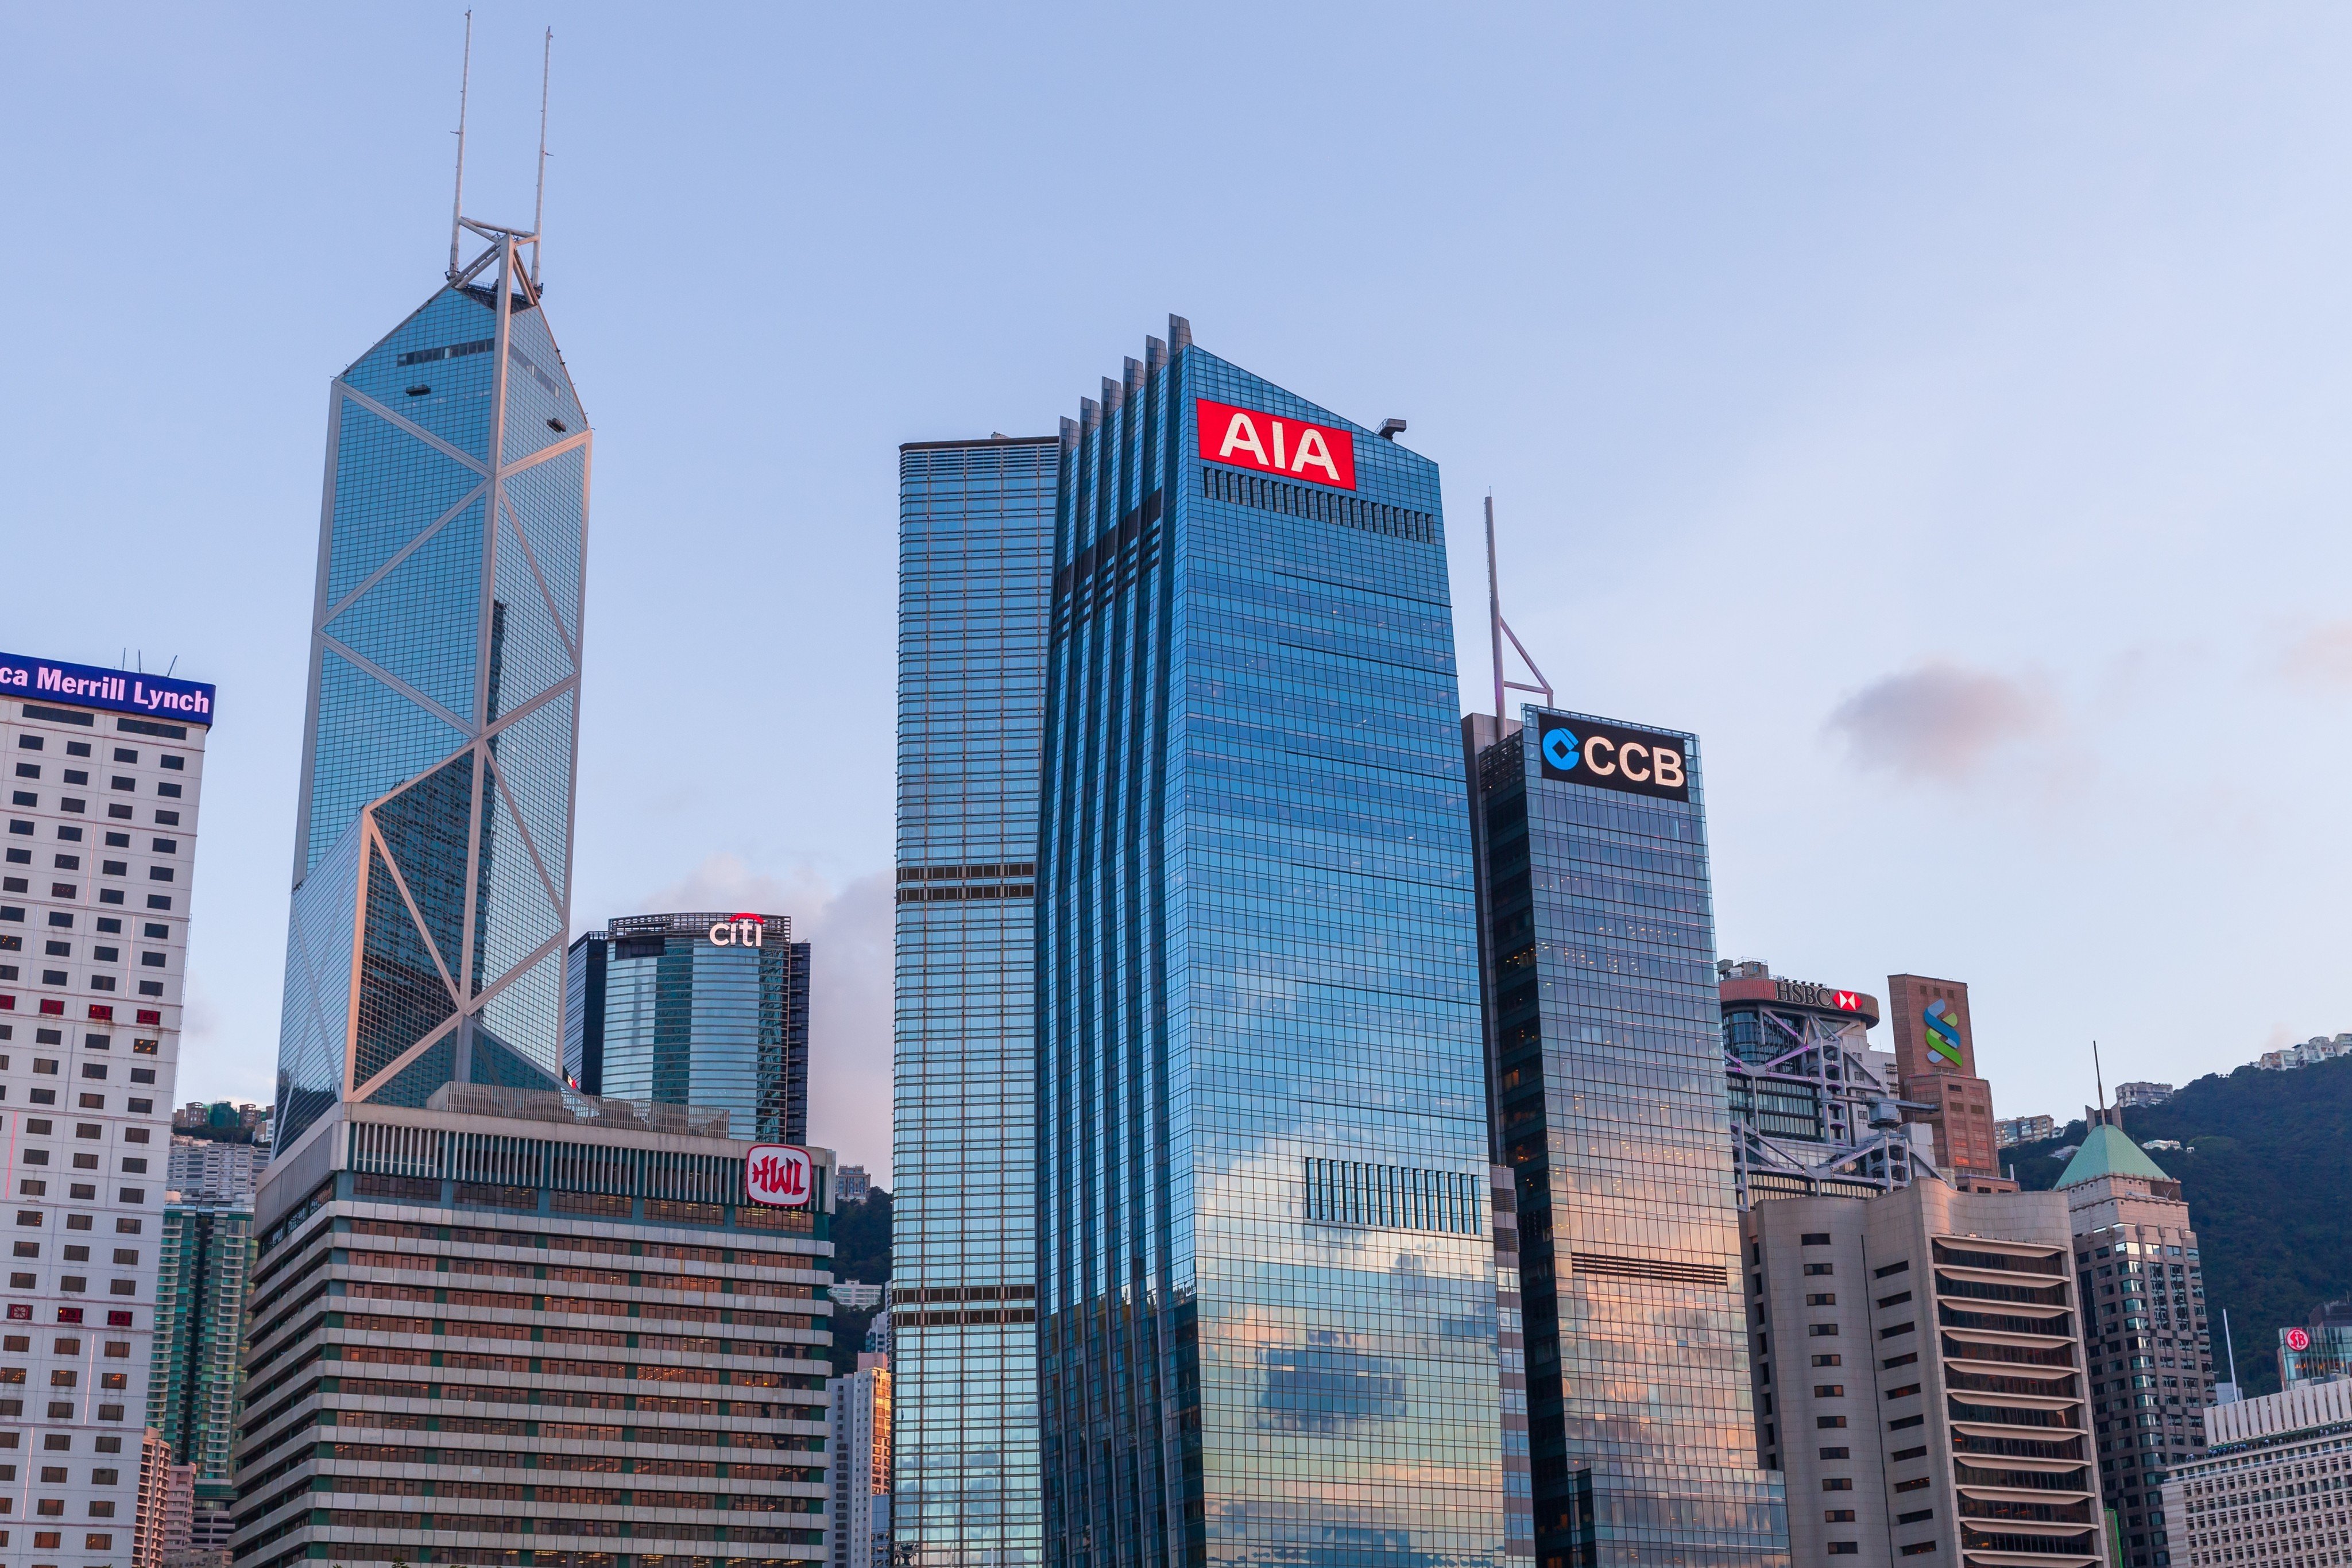 The 38-storey office tower at 1 Connaught Road Central has served as the regional headquarters of Asia’s biggest insurer since 2005. Photo: Shutterstock